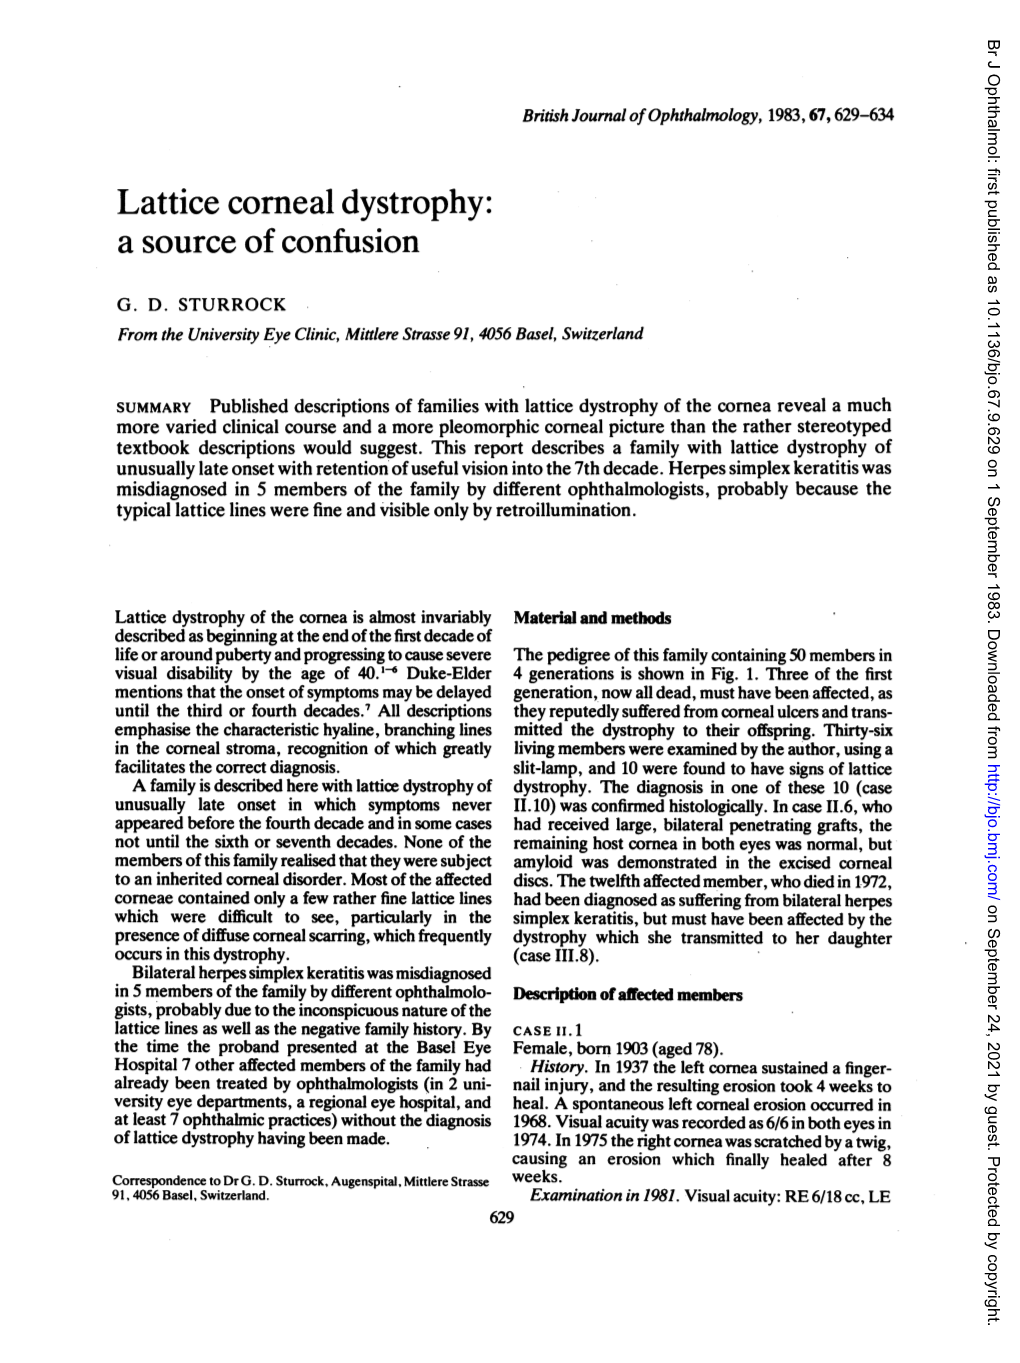 Lattice Corneal Dystrophy: a Source of Confusion